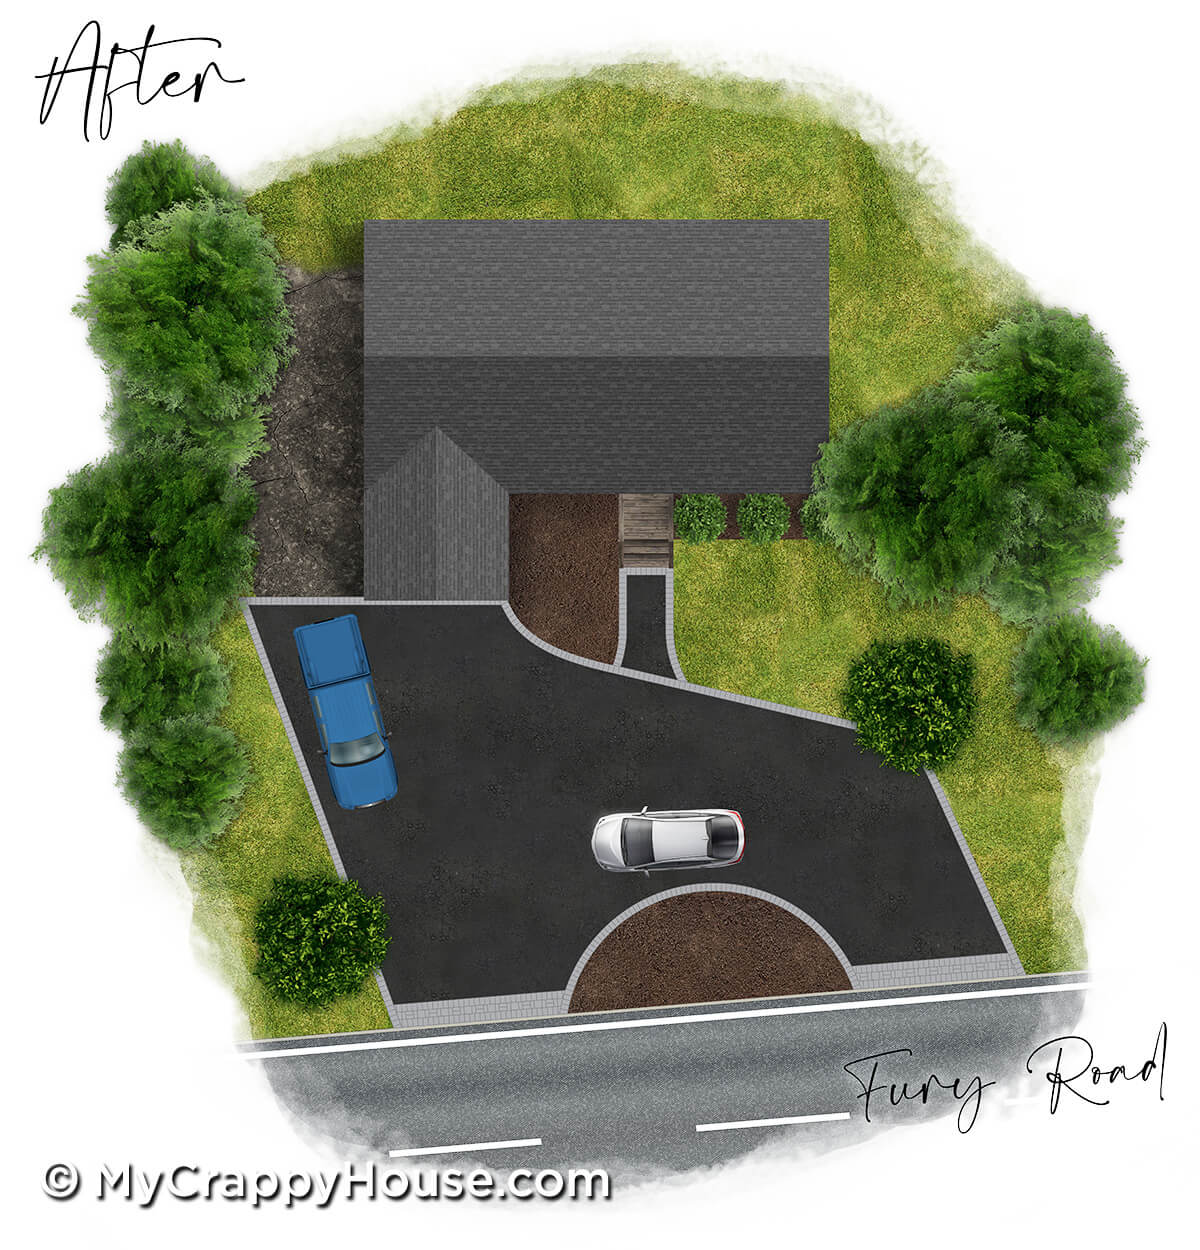 Birds eye view of house with asymmetrical asphalt in and out driveway. Two cars parked.